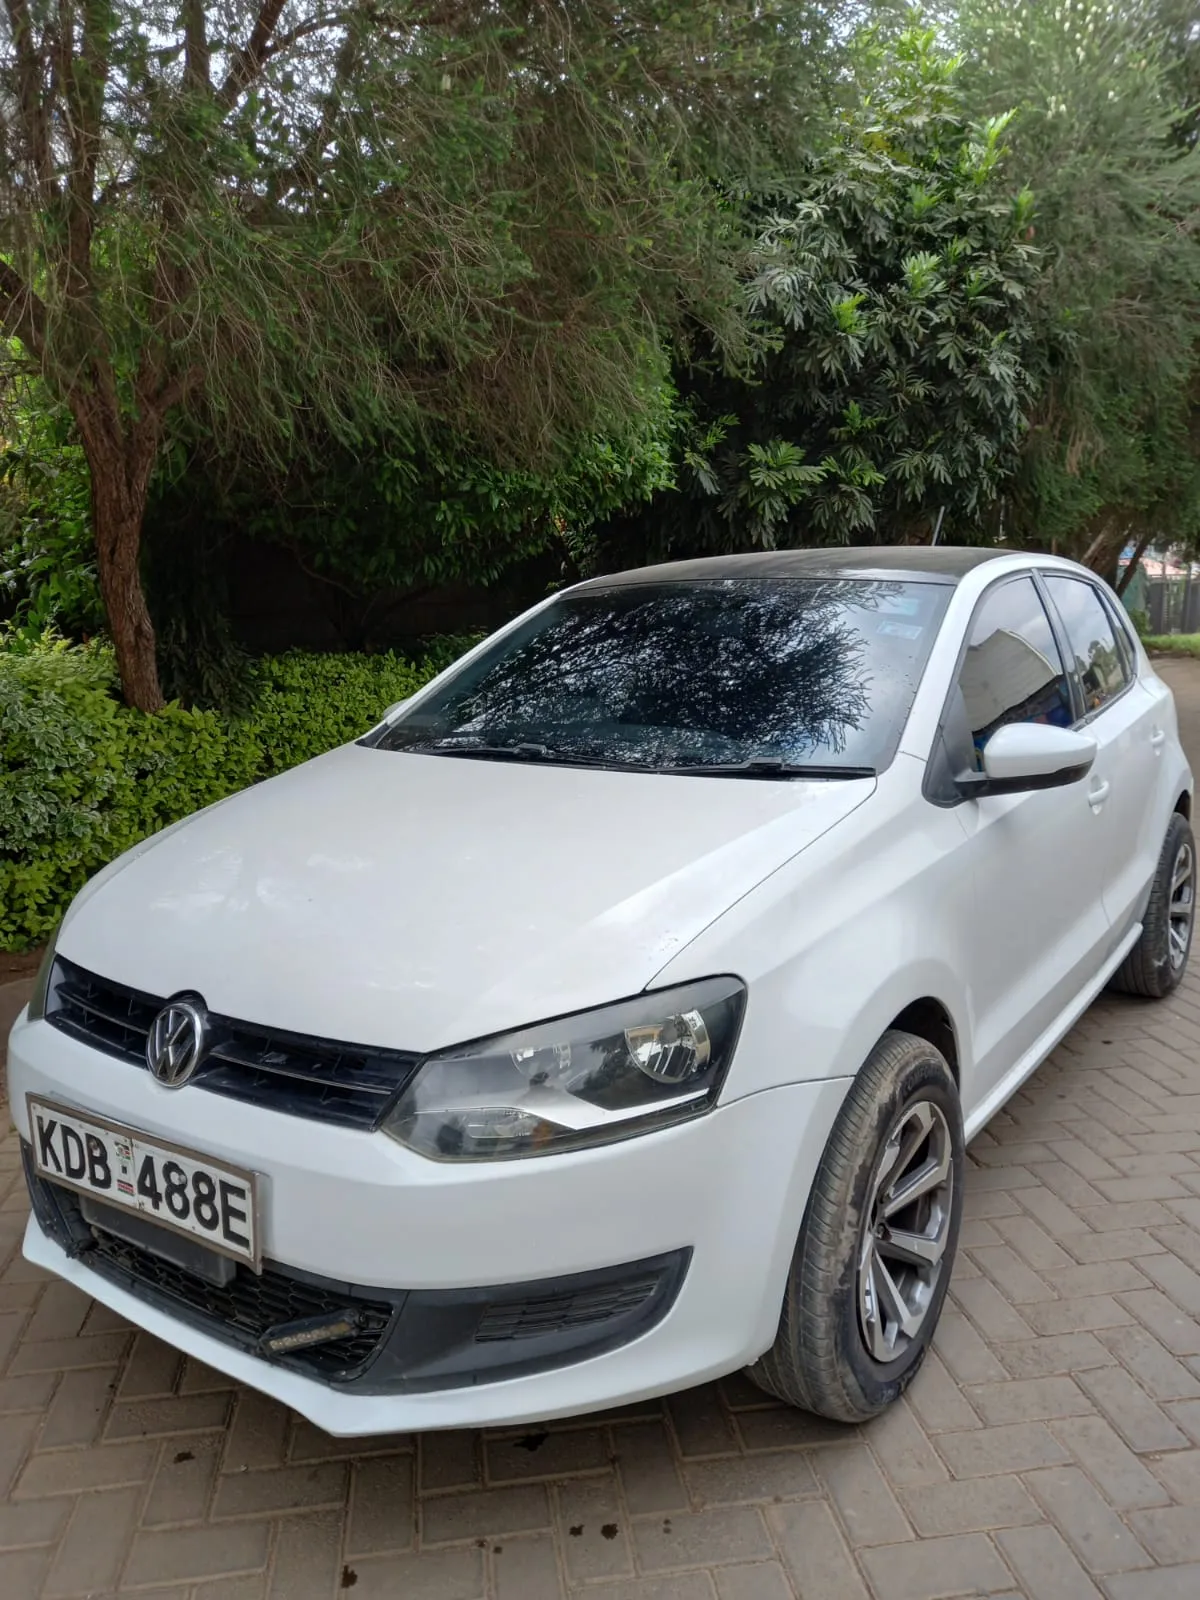 Cars Cars For Sale/Vehicles-Volkswagen Polo 2013 Pay 20% deposit Exclusive Offer 7